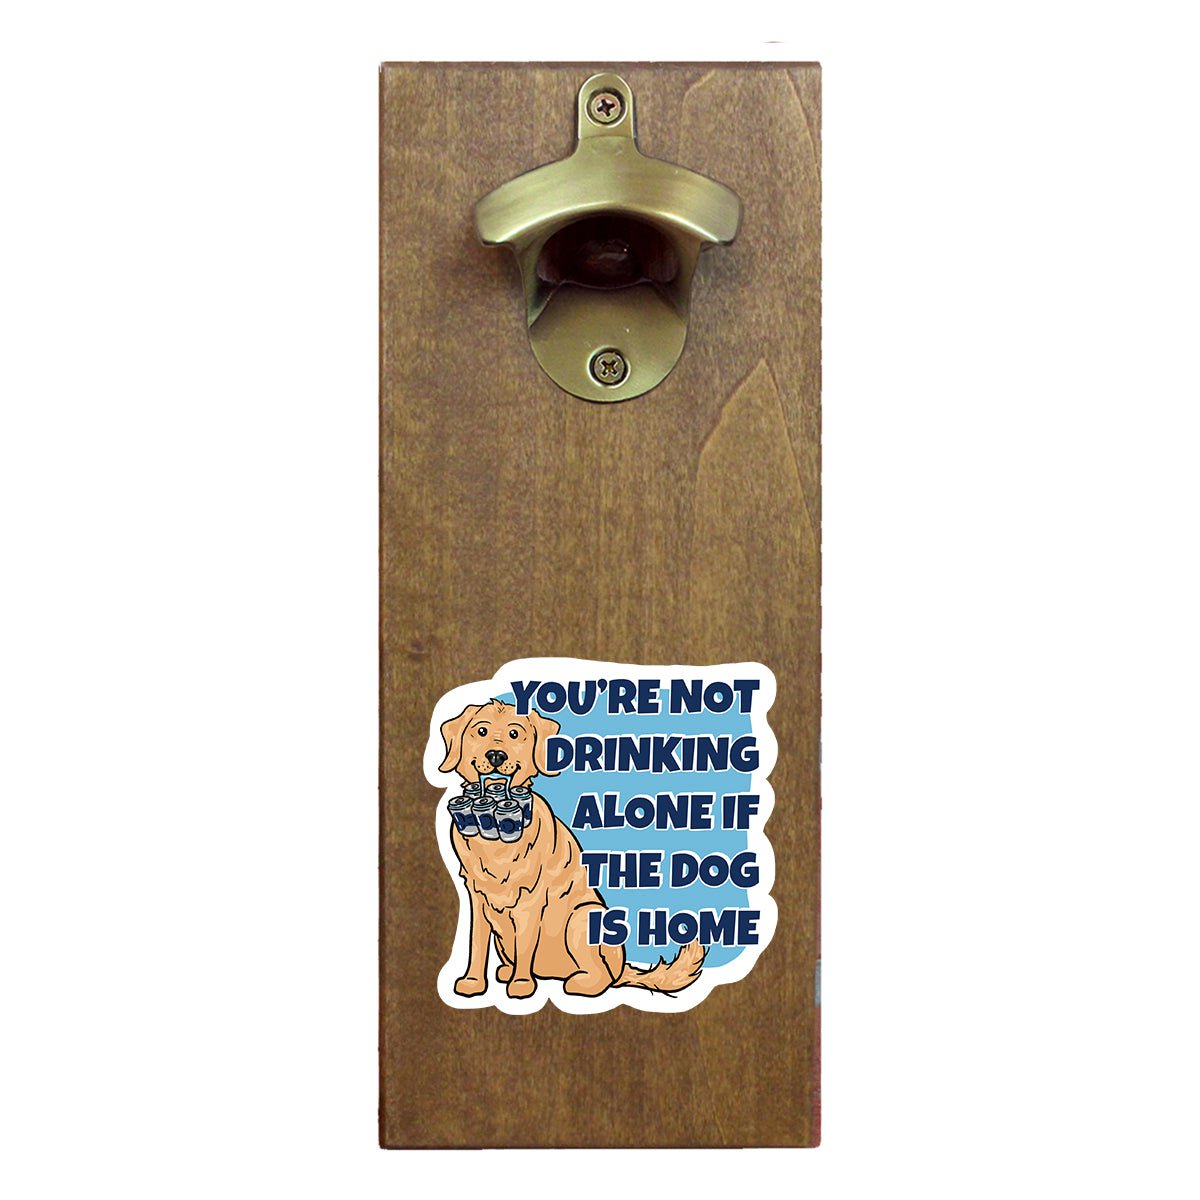 Torched Products Bottle Opener You're Not Drinking Alone if the Dog is Home Bottle Opener